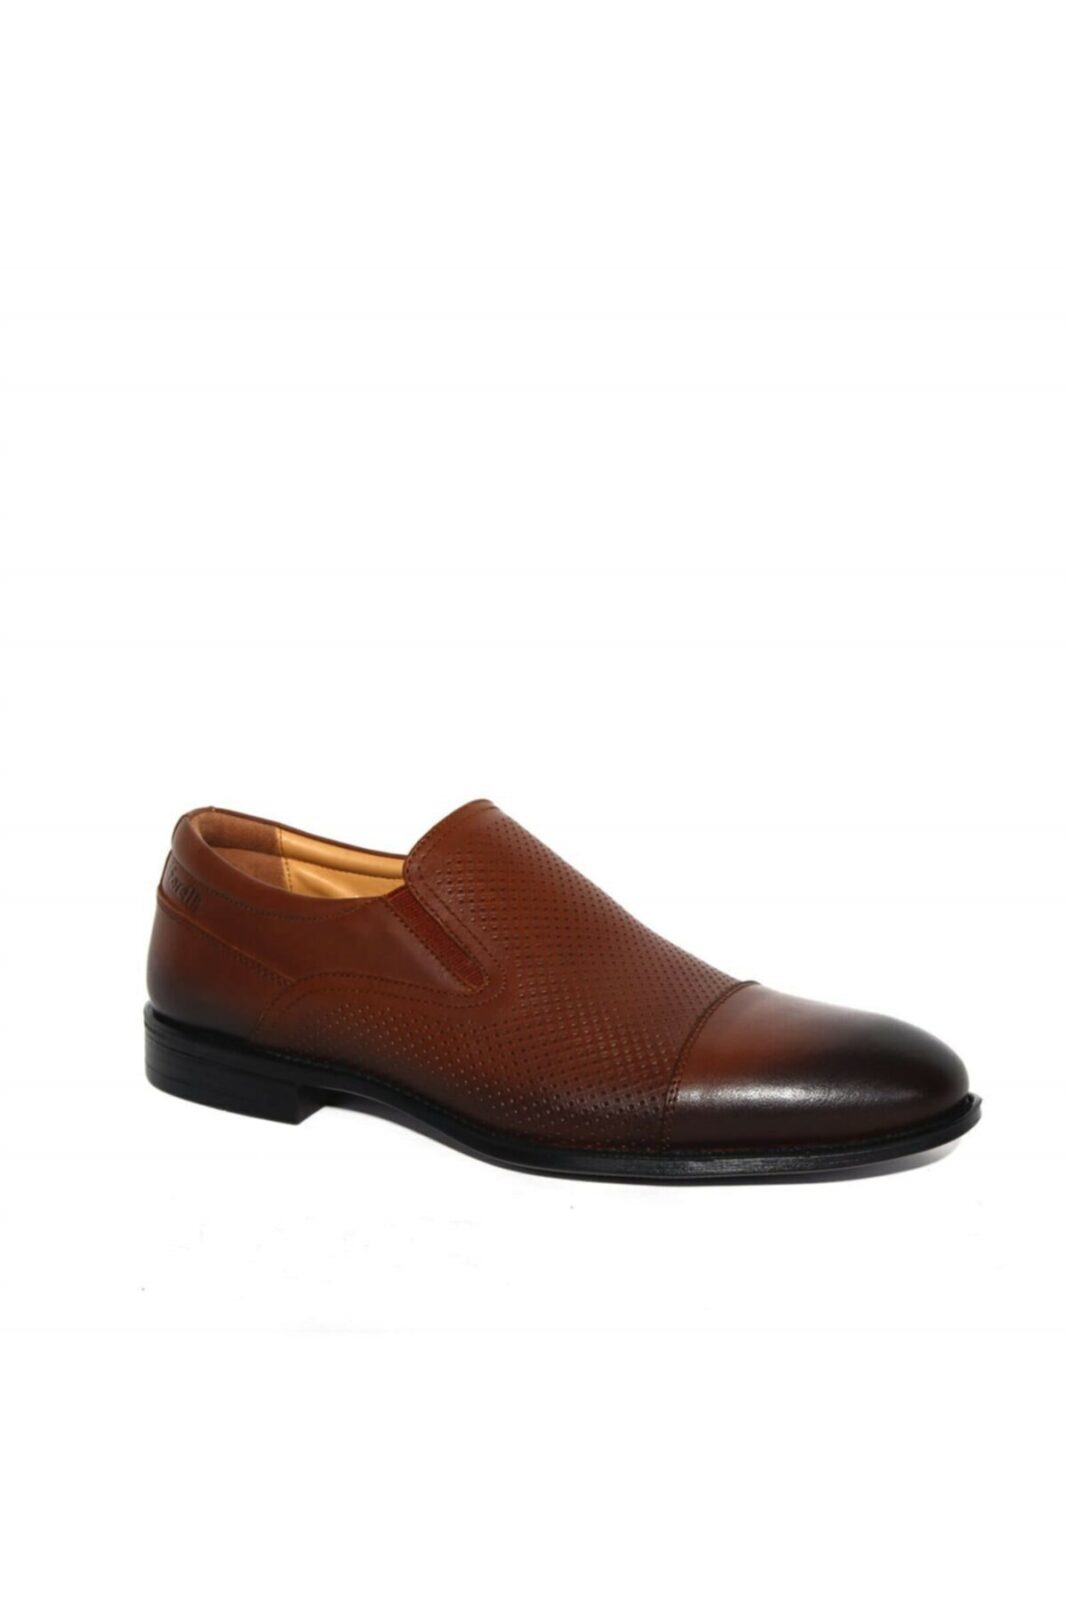 Forelli Business Shoes - Brown